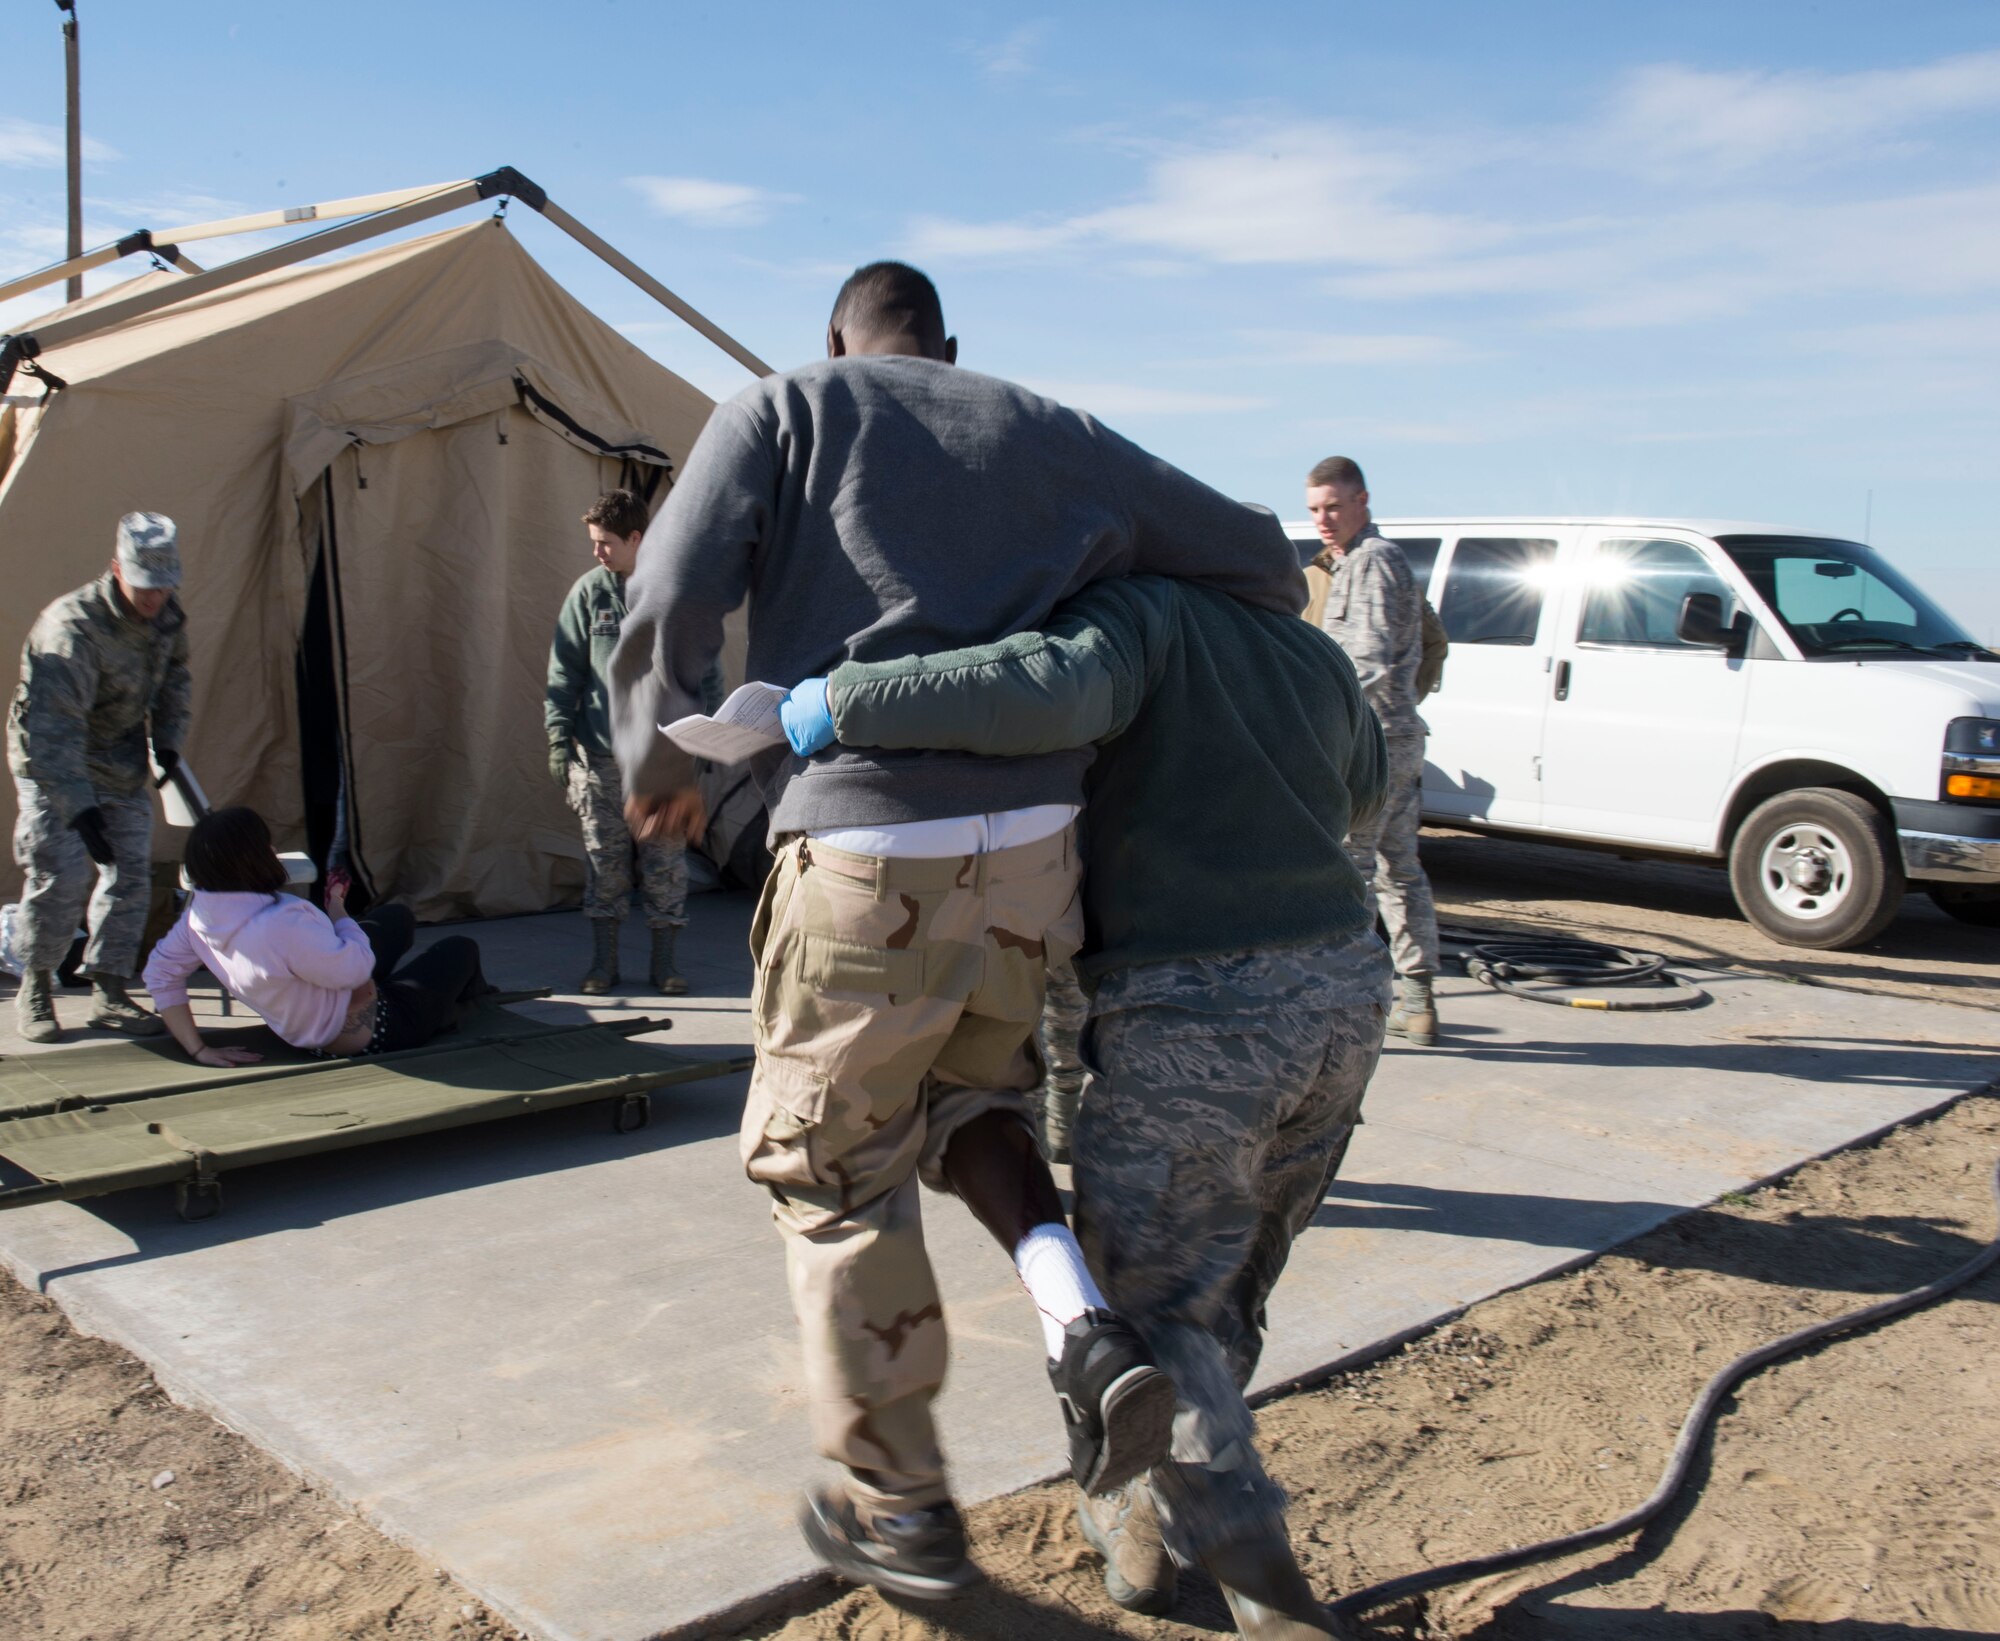 Capt. Amanda Roby, operating room nurse with the 141st Medical Group helps Airman 1st Class Kevin Joseph, aerospace medical technician from the 366th Medical Operations Squadron, walk to a safe place for his simulated evaluation at Mountain Home Air Force Base, Idaho, Nov. 5, 2015. Joseph volunteered to act as an injured patient during the Gunfighter Flag 16-1 exercise. (U.S. Air Force photo by Airman 1st Class Jessica H. Evans/RELEASED)